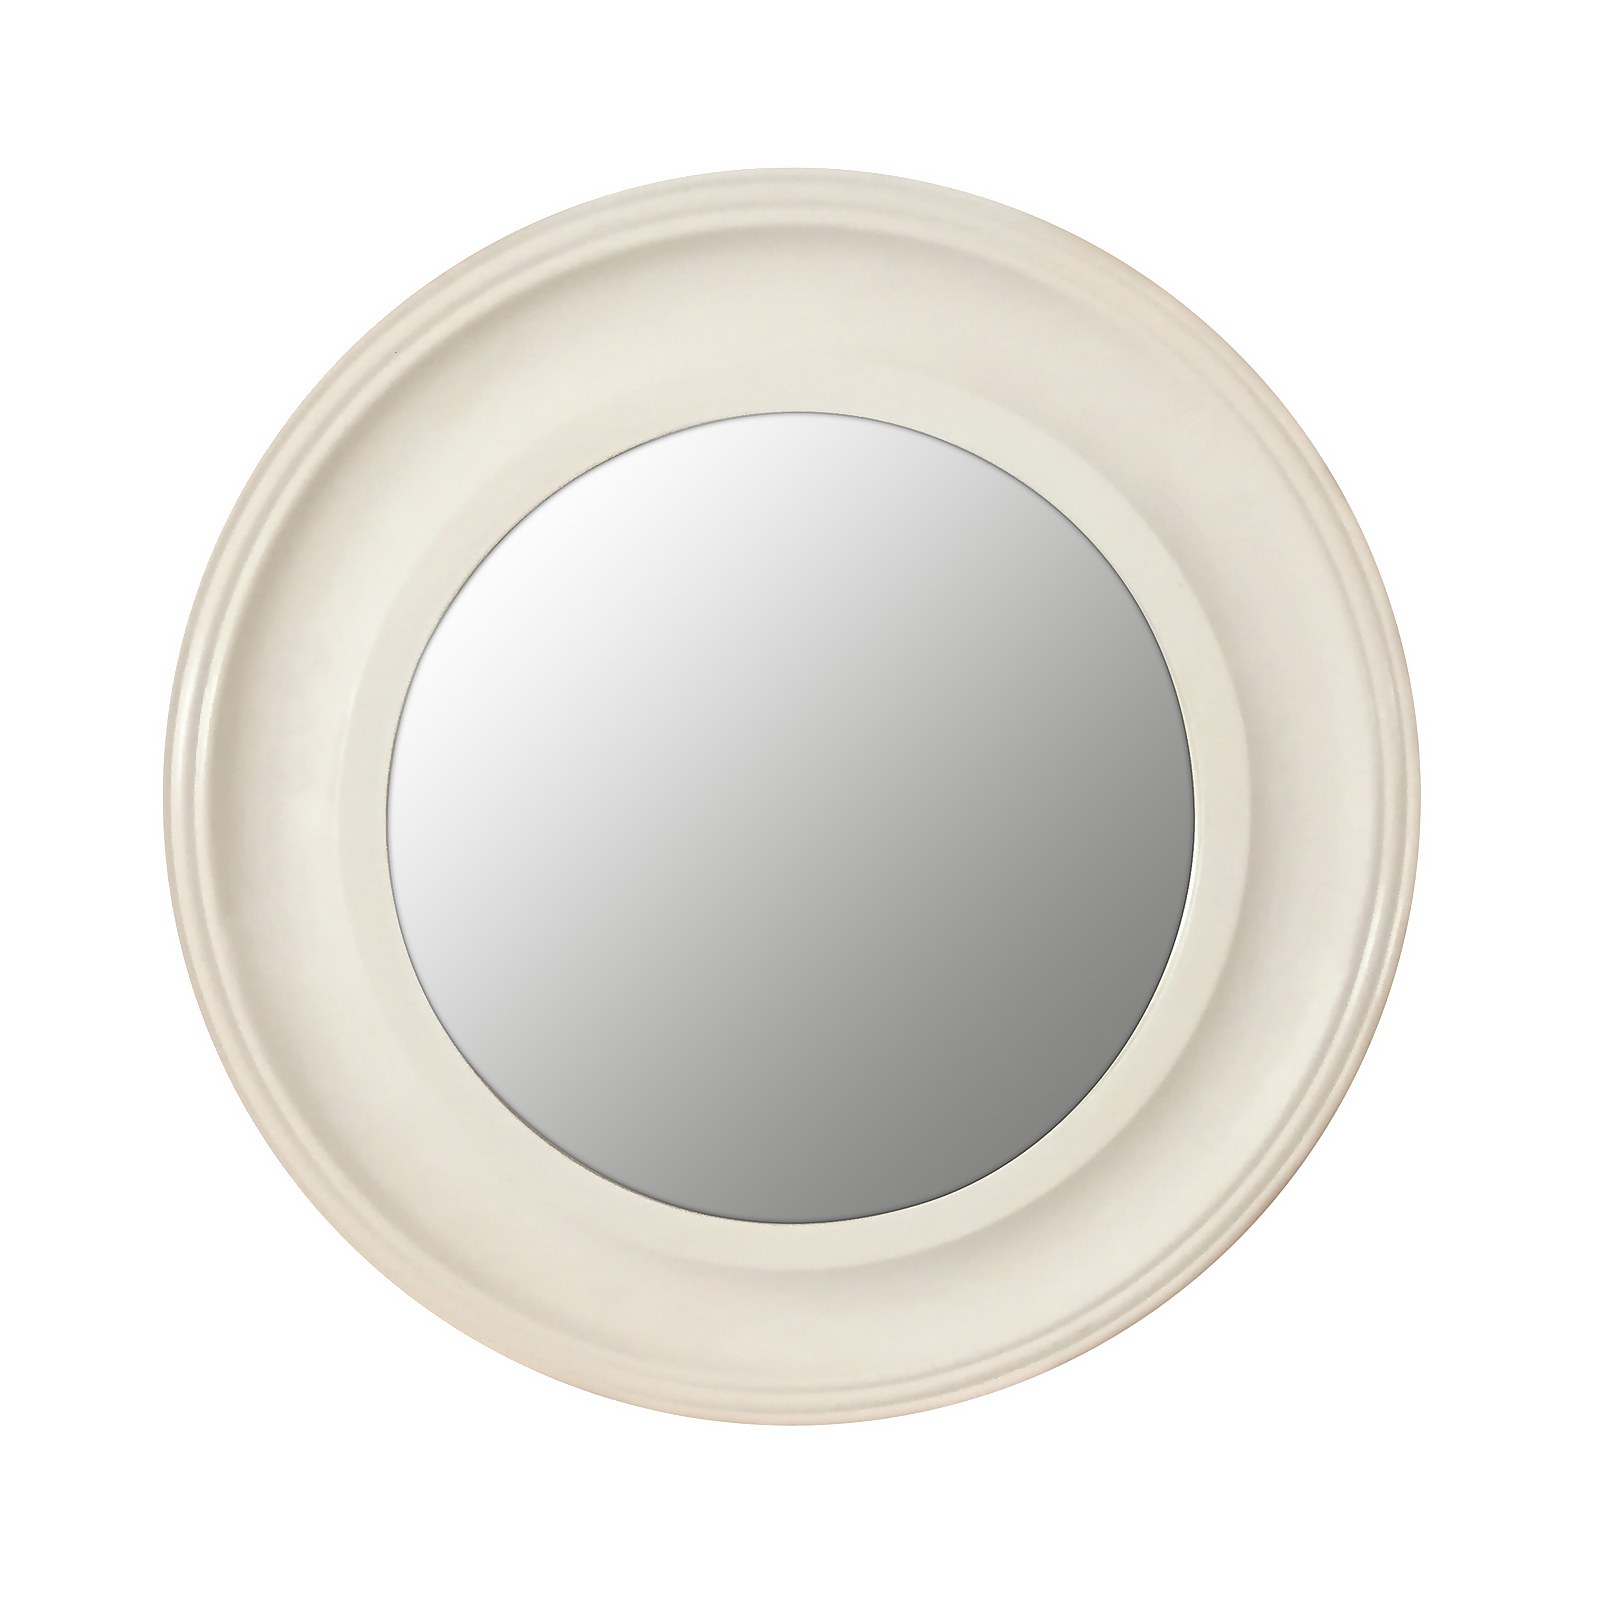 Photo of Country Living Round Wall Mirror 55cm - Cream